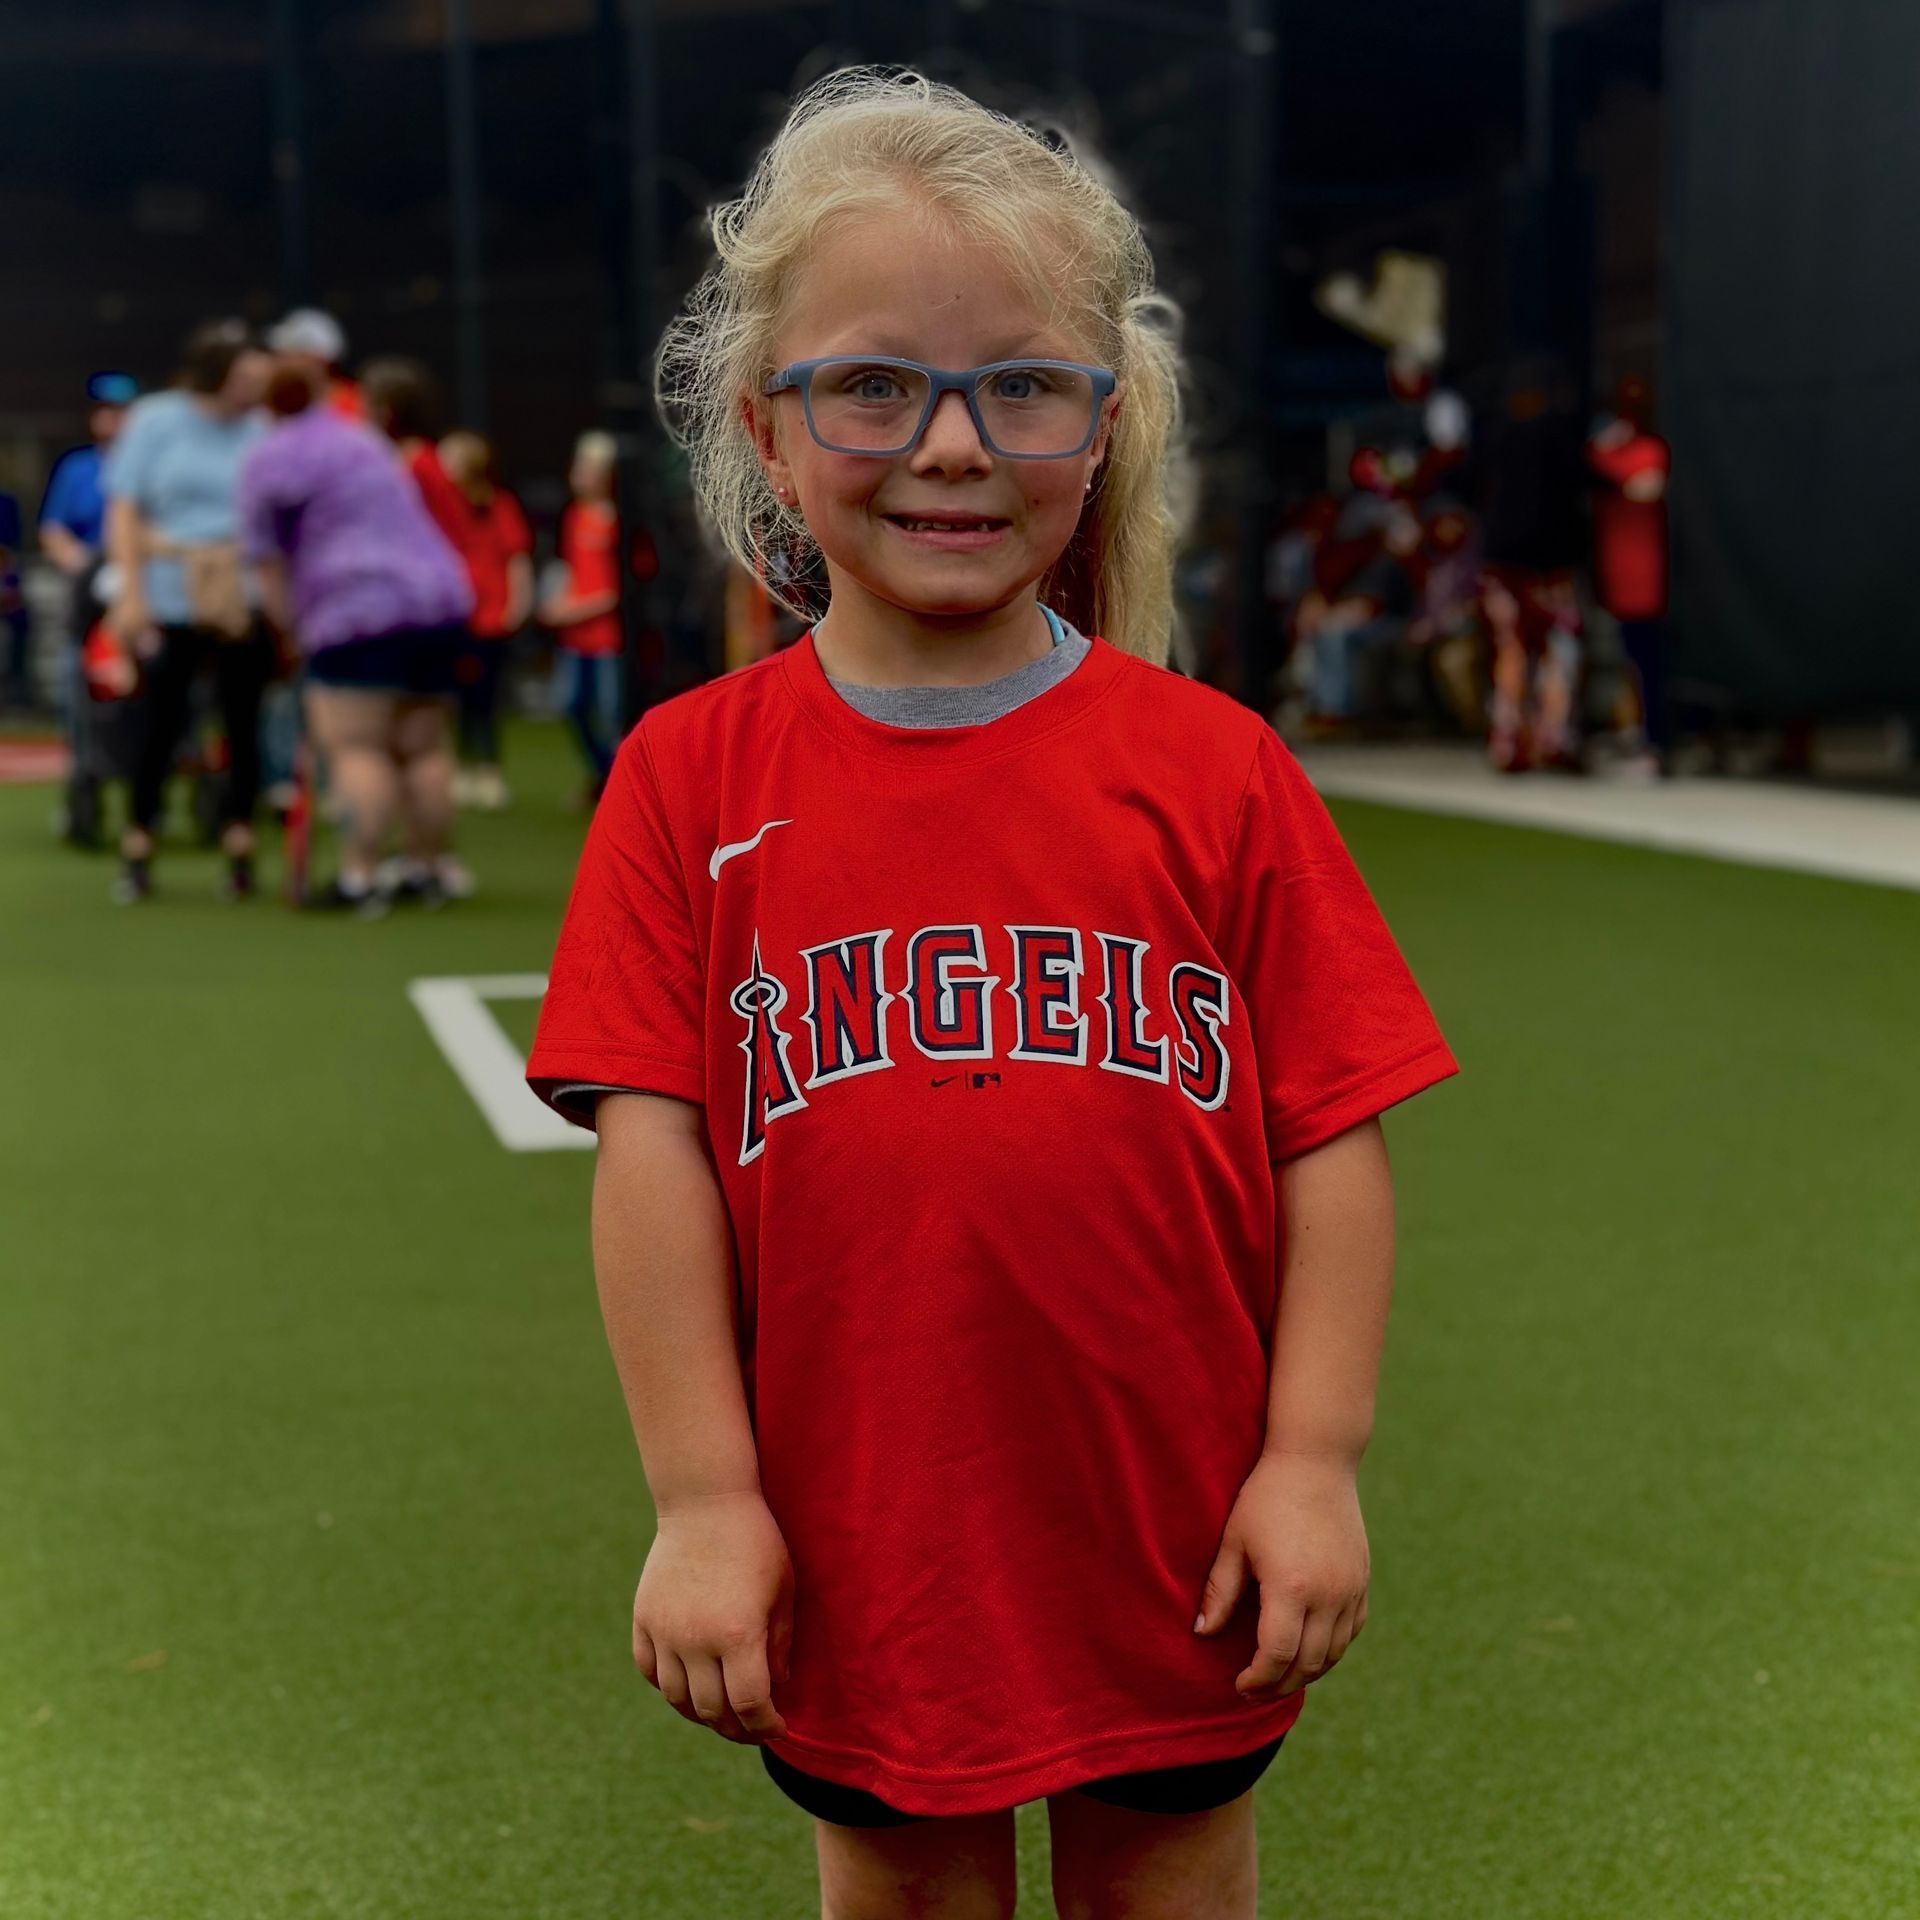 A little girl wearing a red shirt that says angels